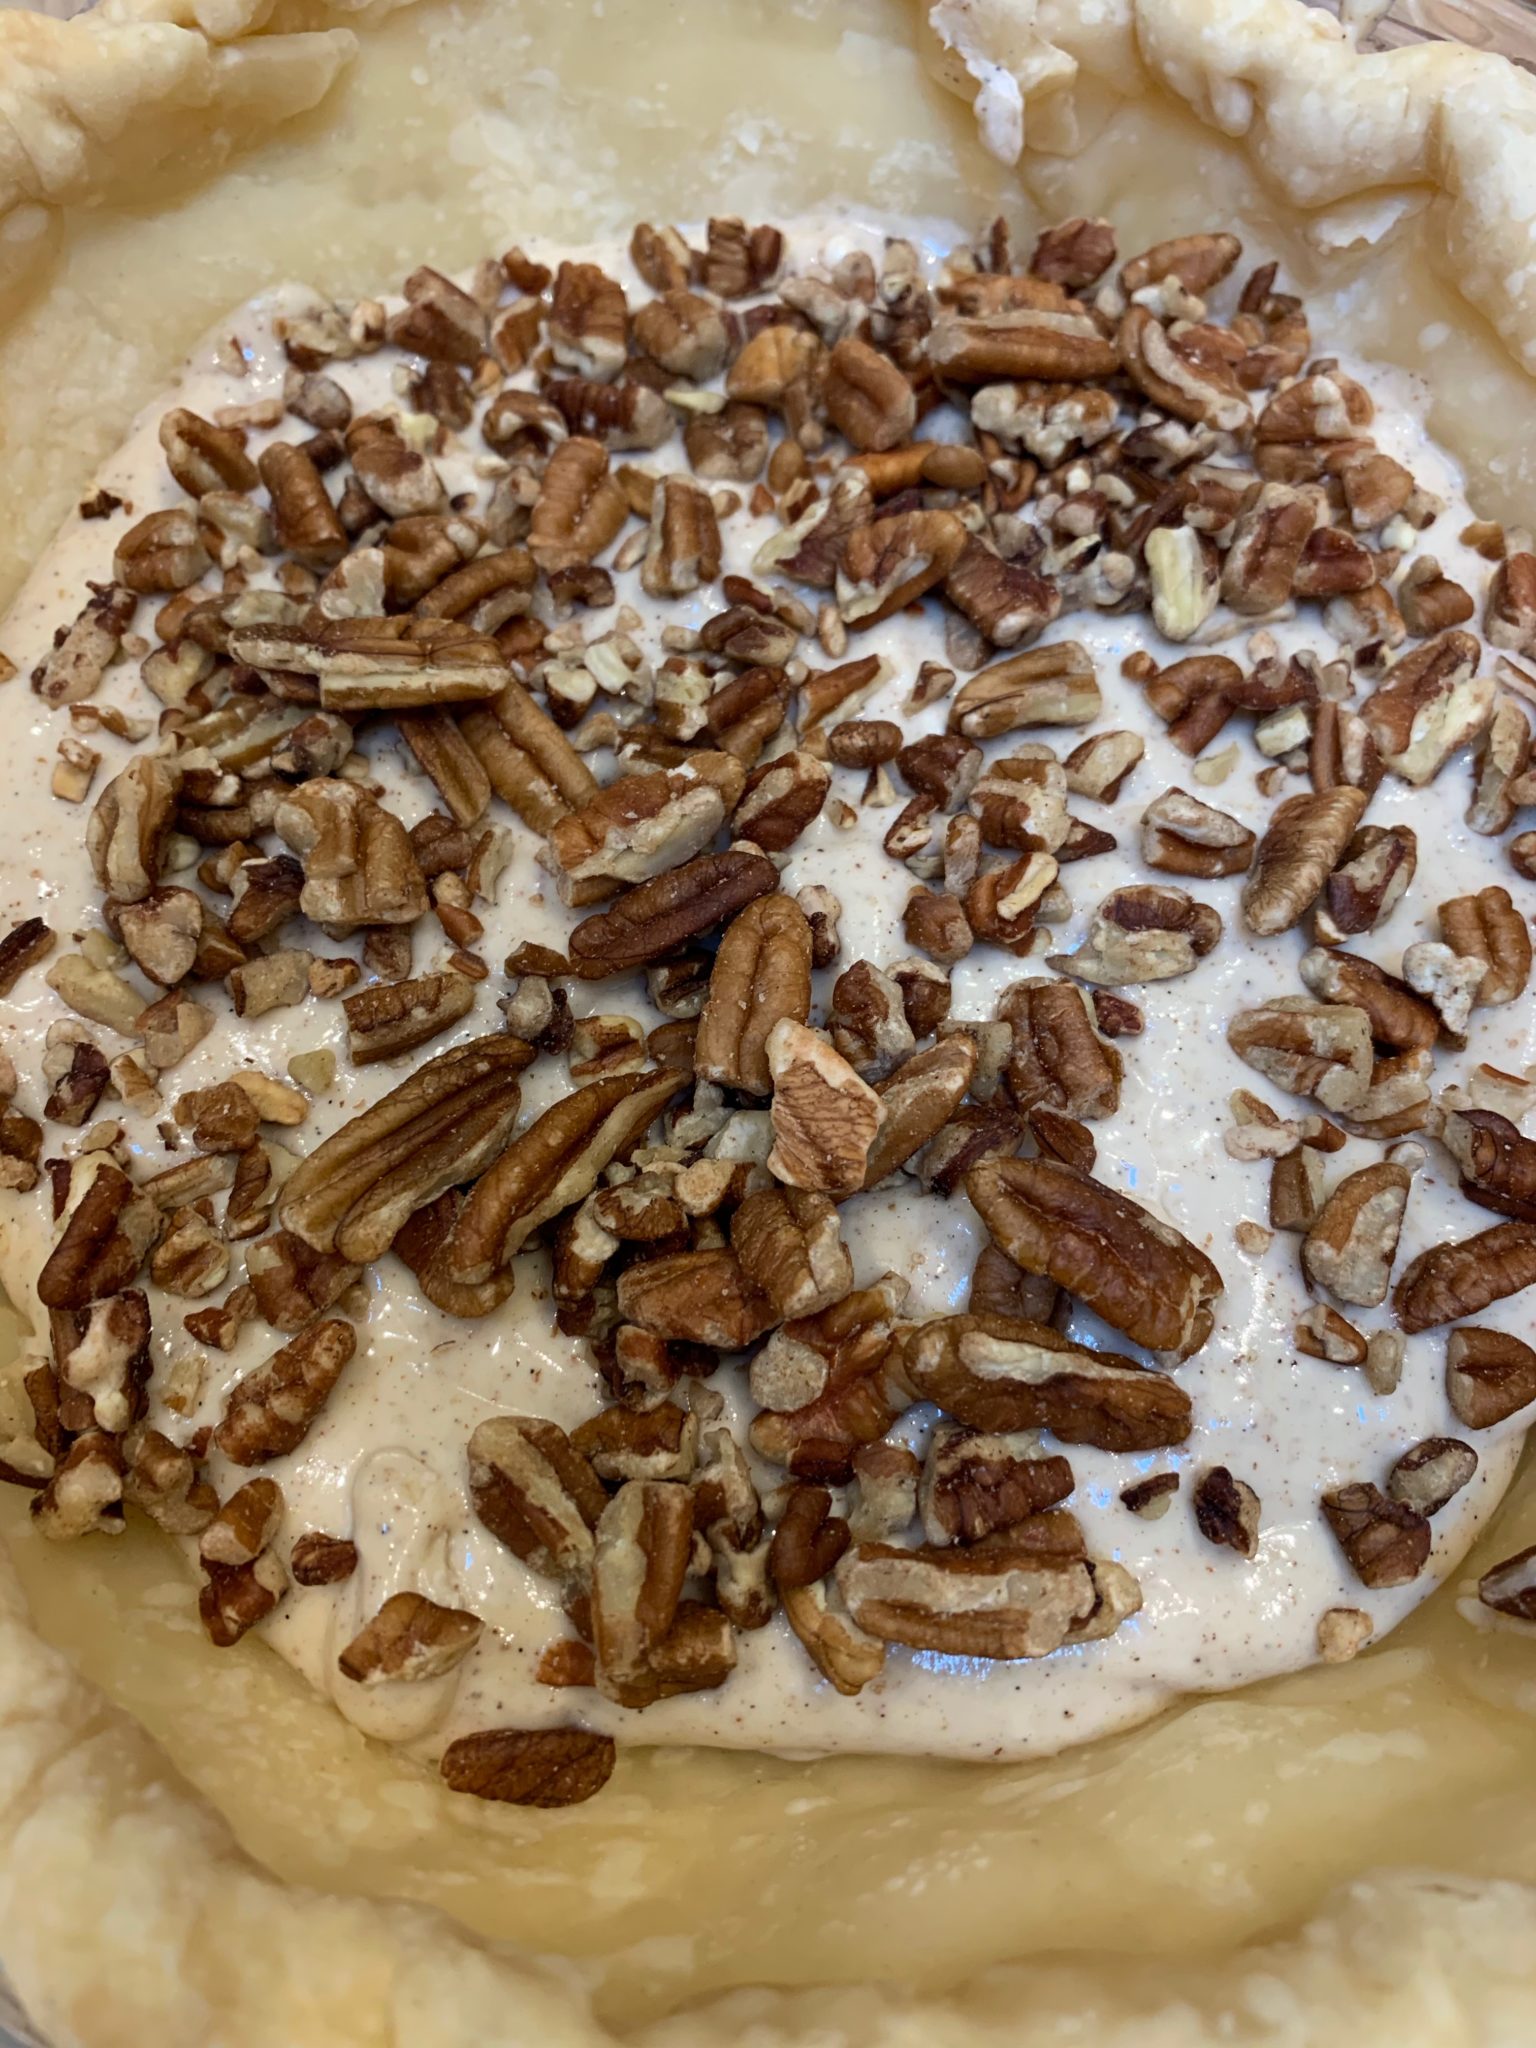 Showing chopped pecans layered on top of the cheesecake so as not to disturb the filling